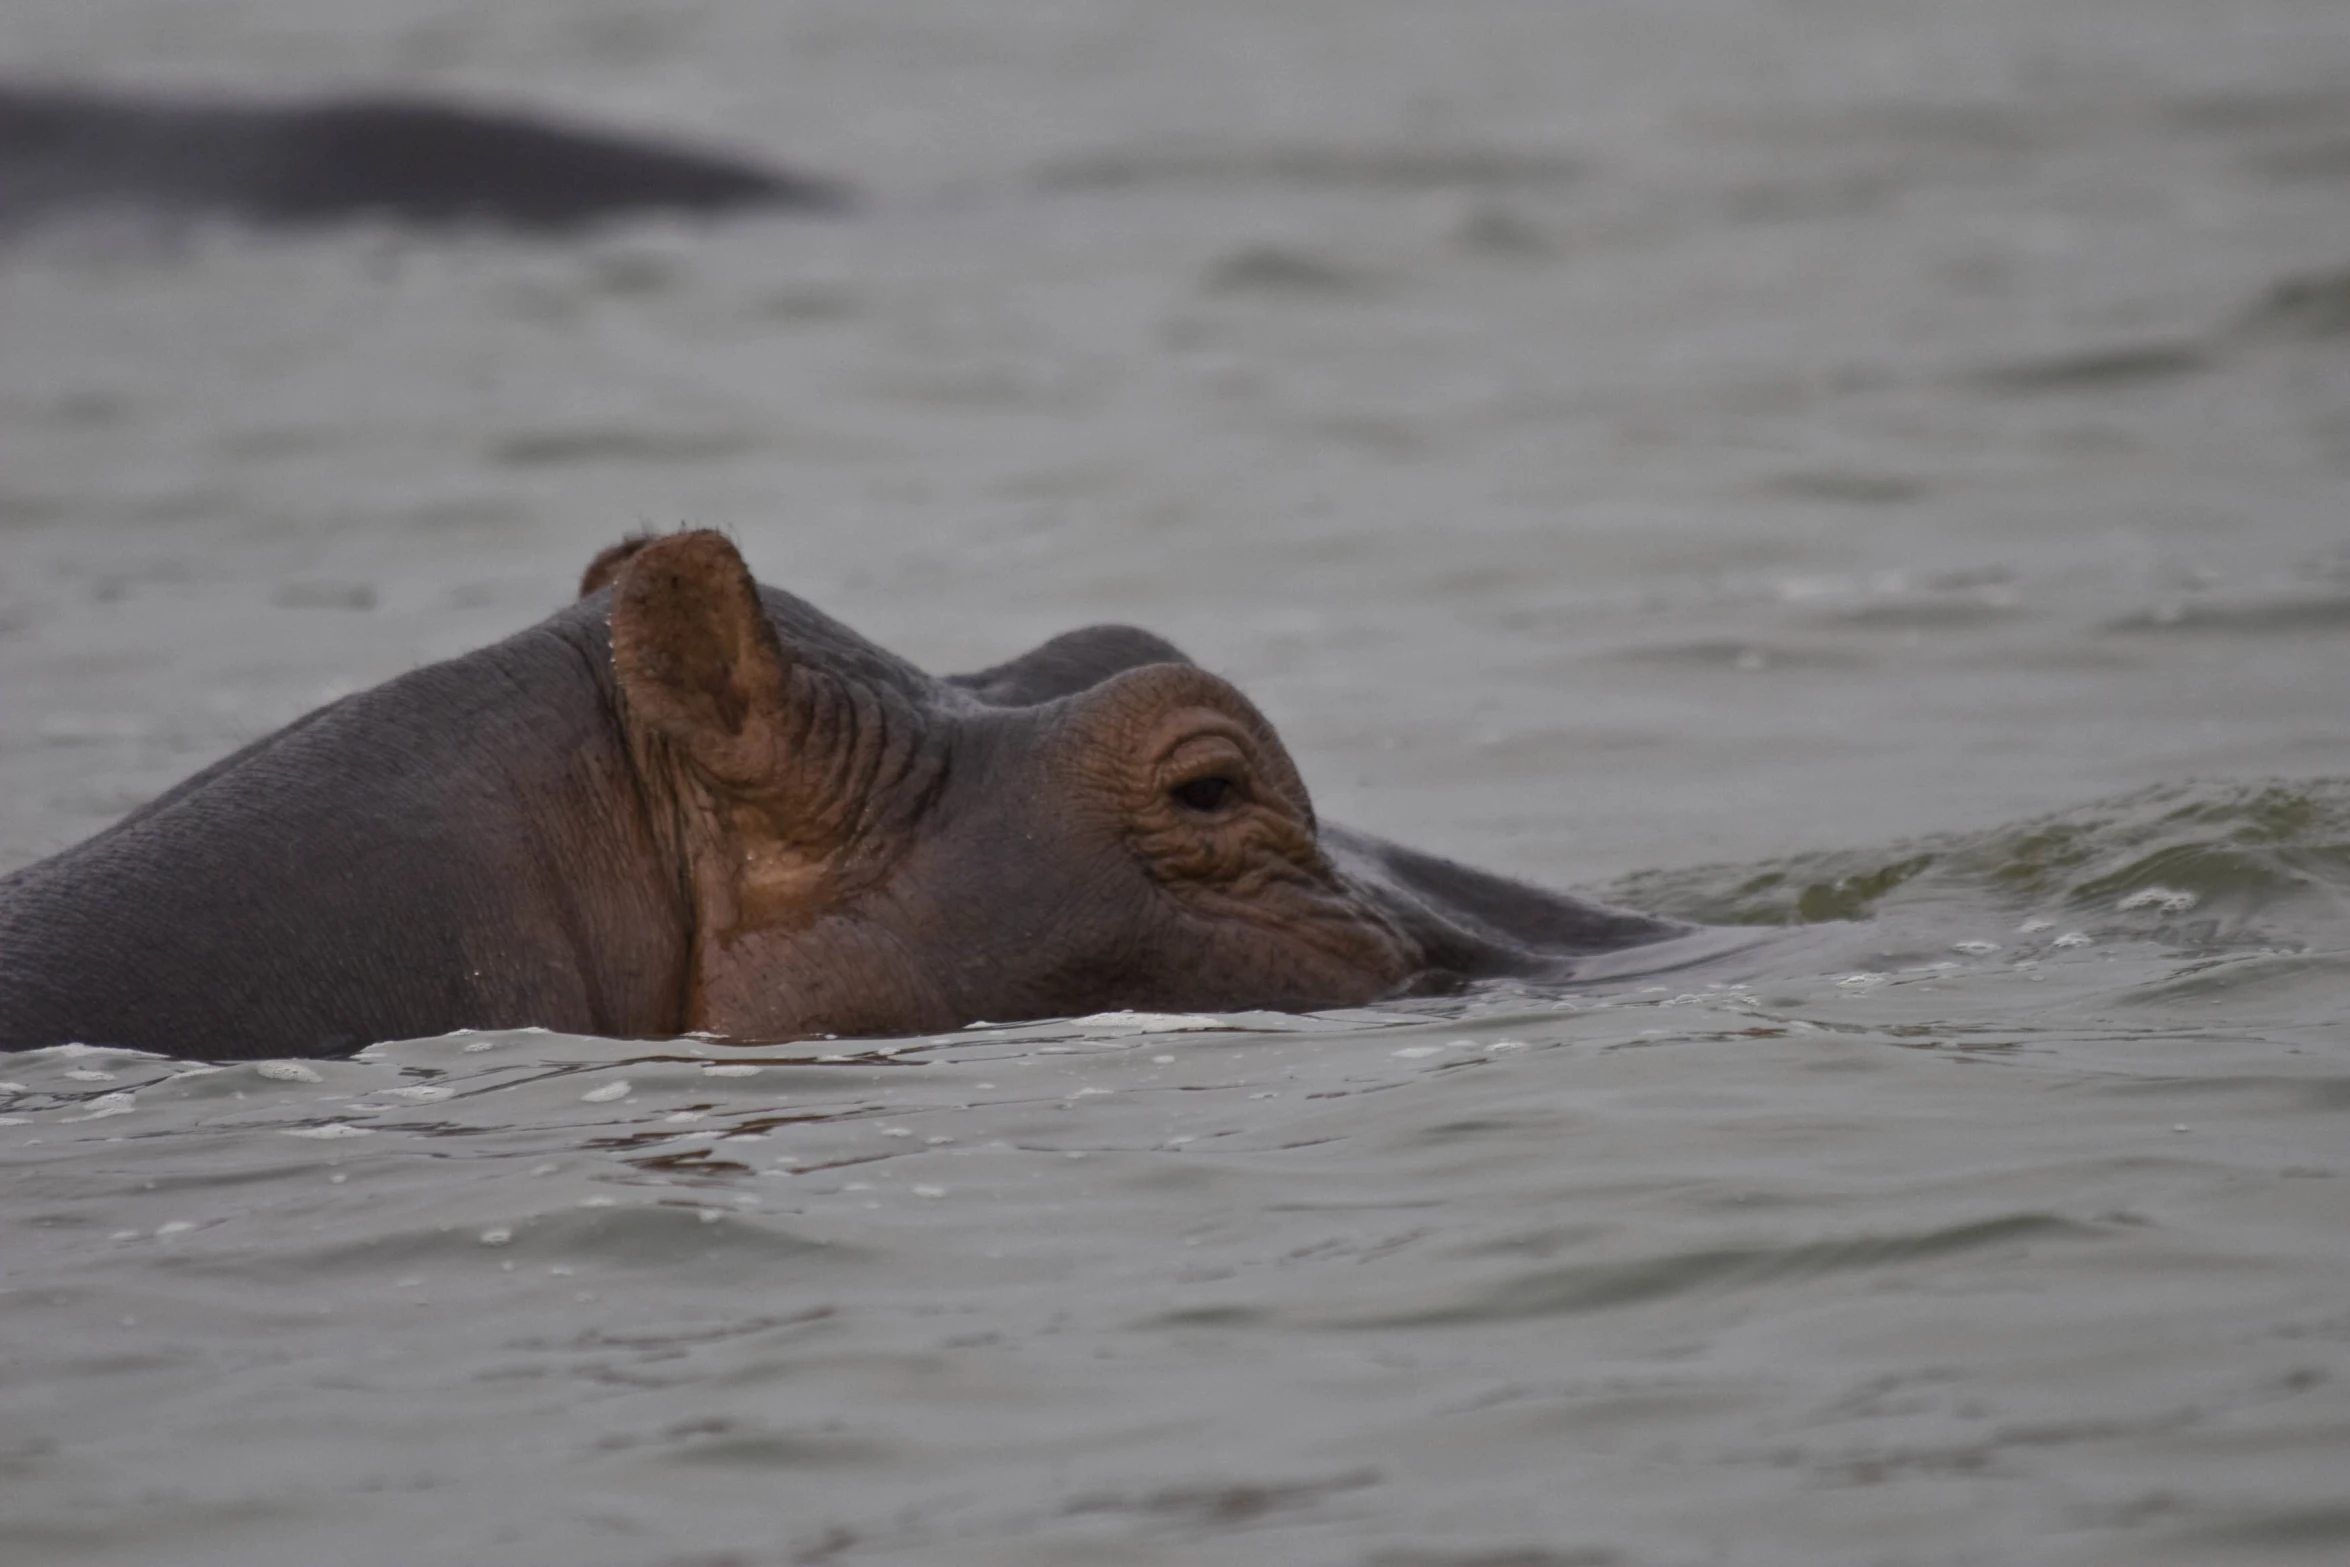 the young elephant is being submerged in the water